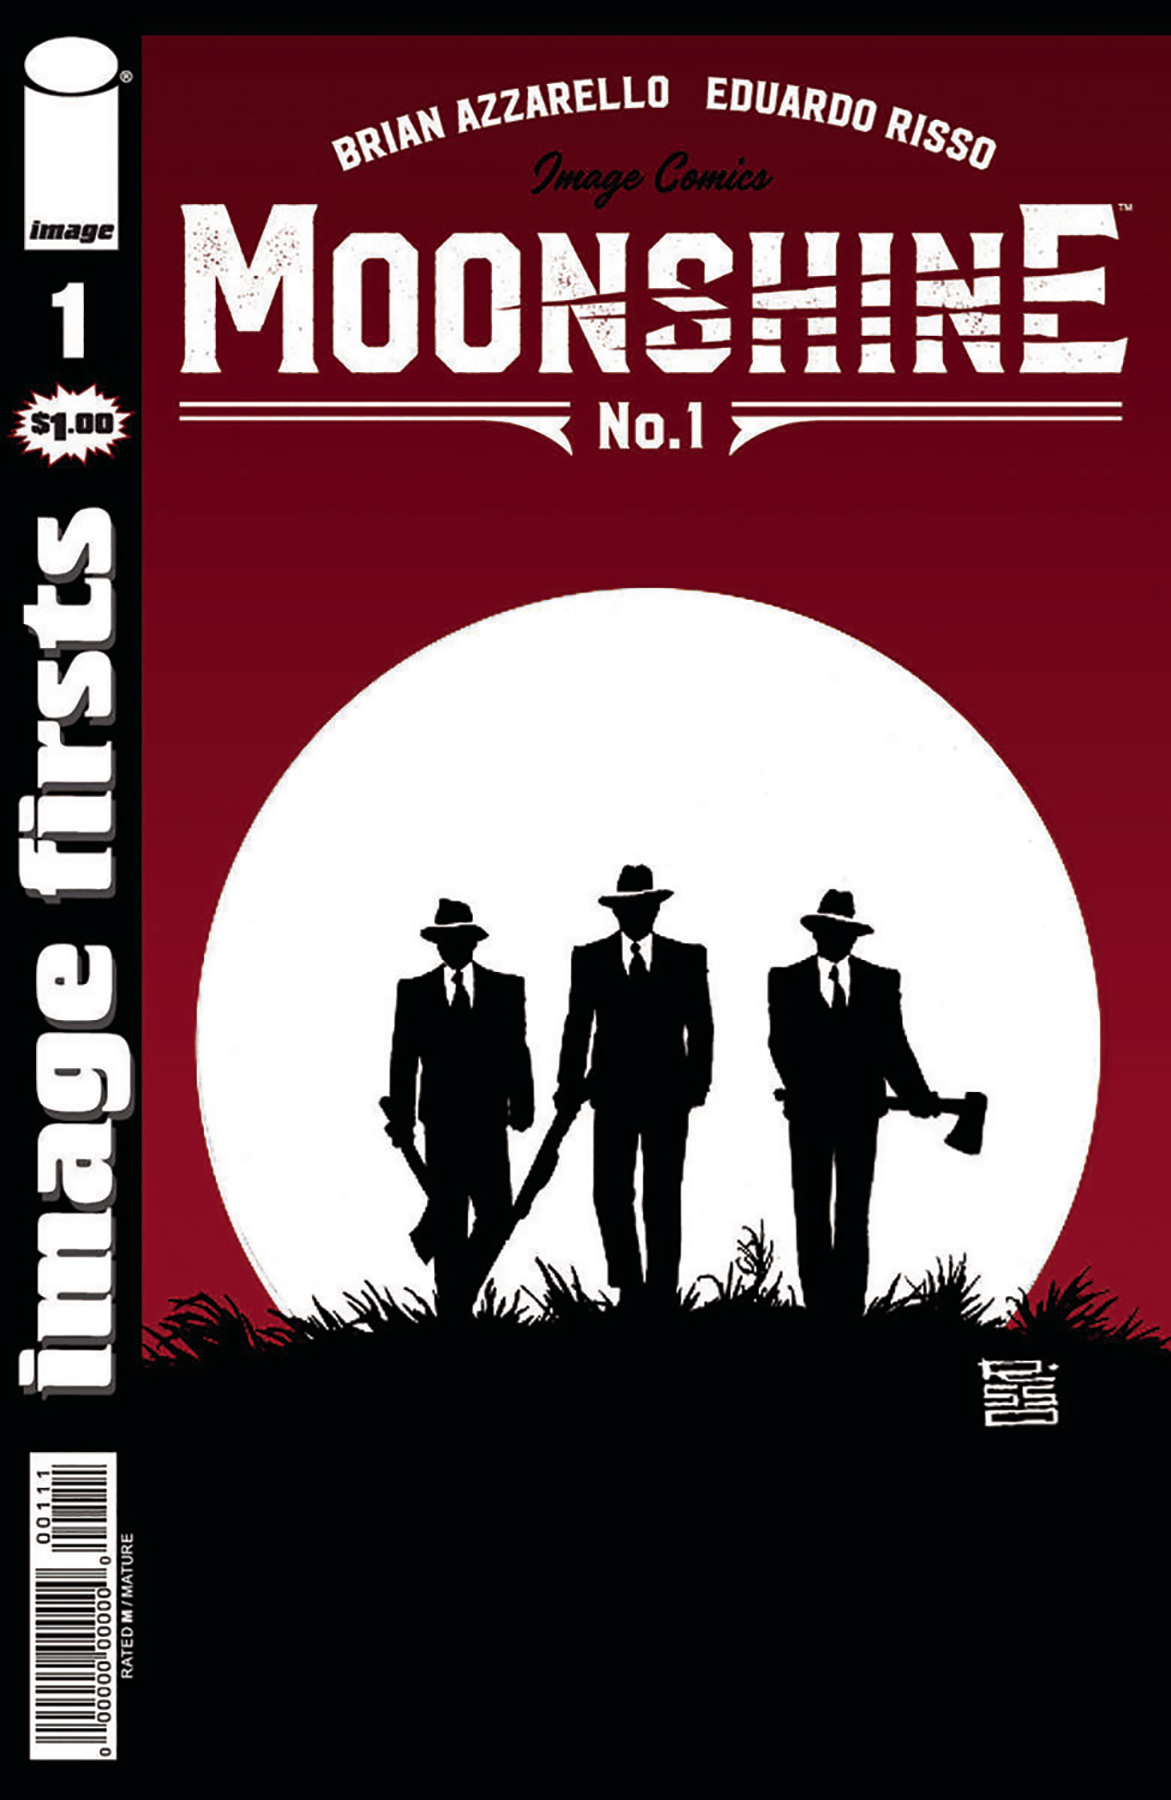 Image Firsts Moonshine #1 Volume 31 (Mature)